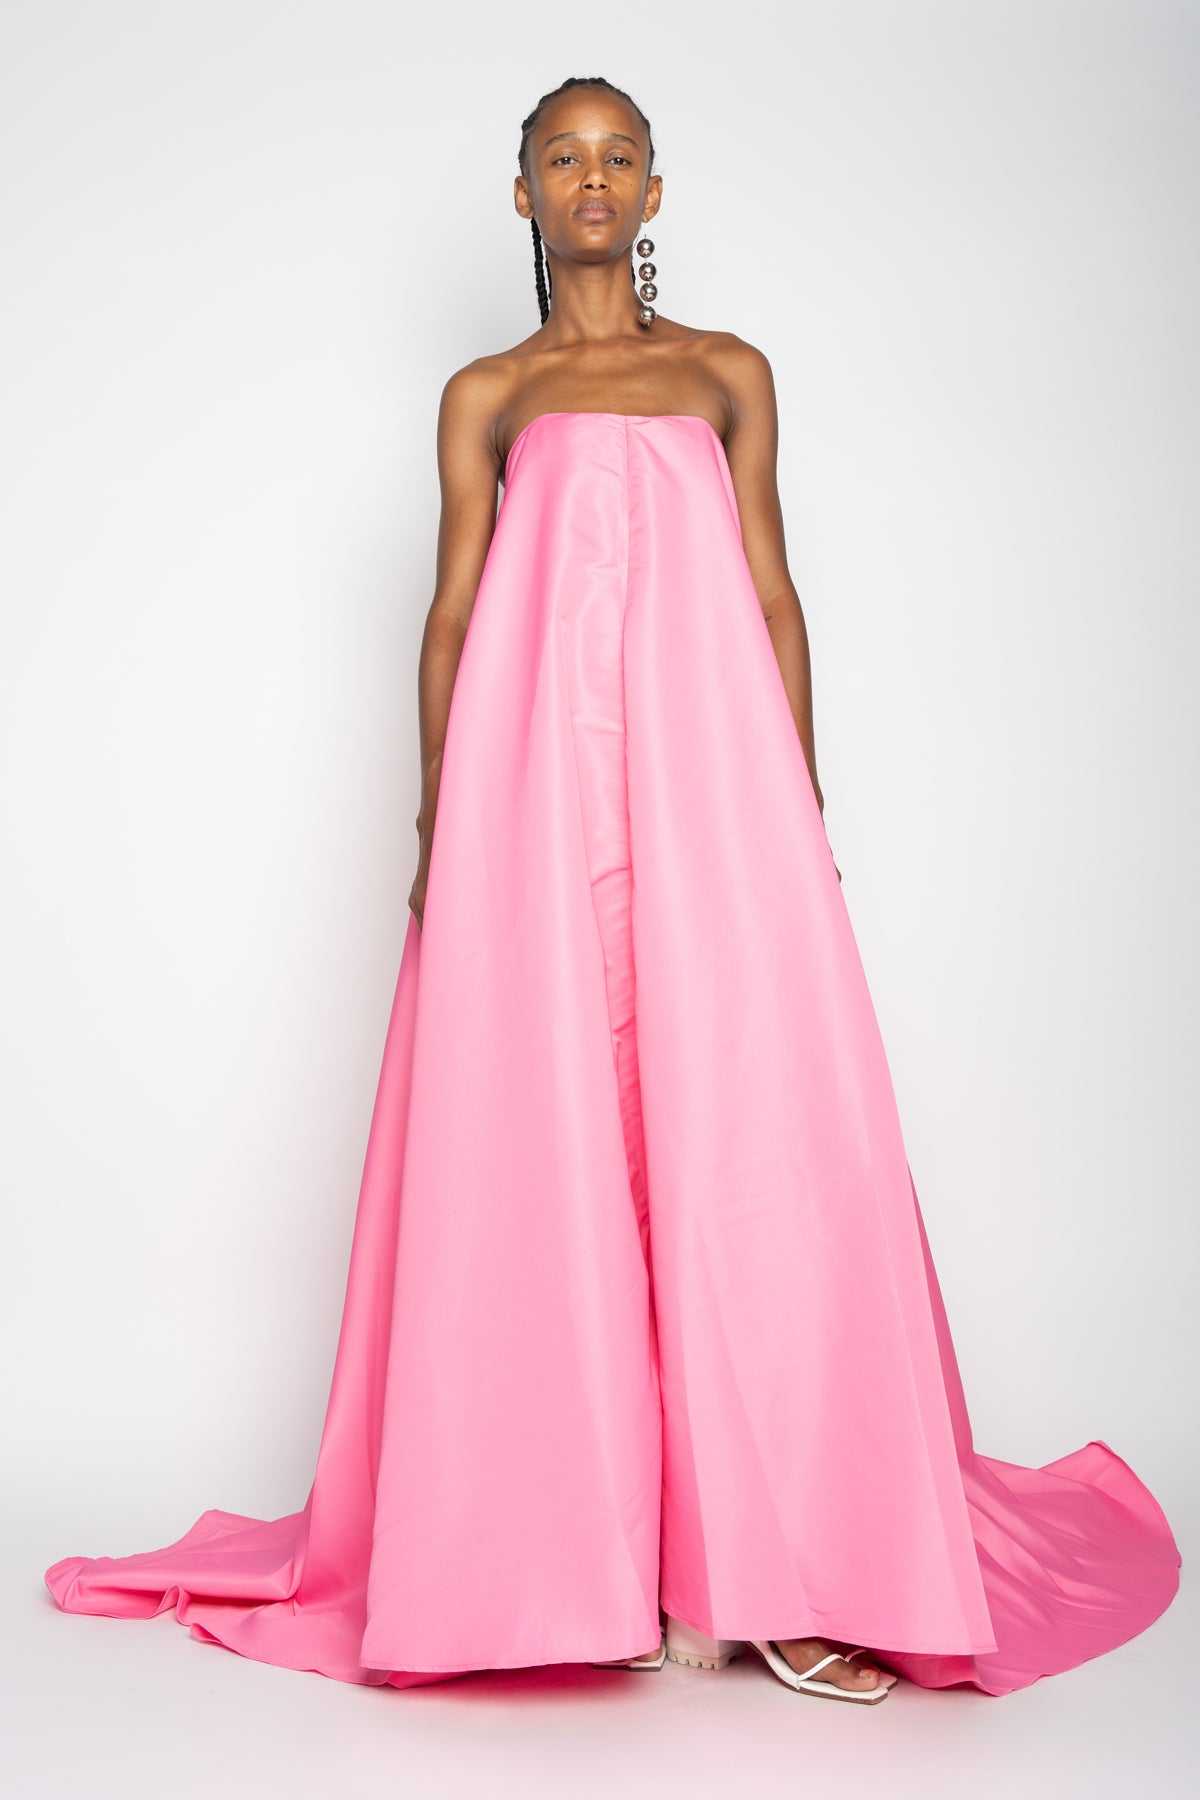 PINK DRESS WITH GIANT BOW IN THE BACK marques almeida